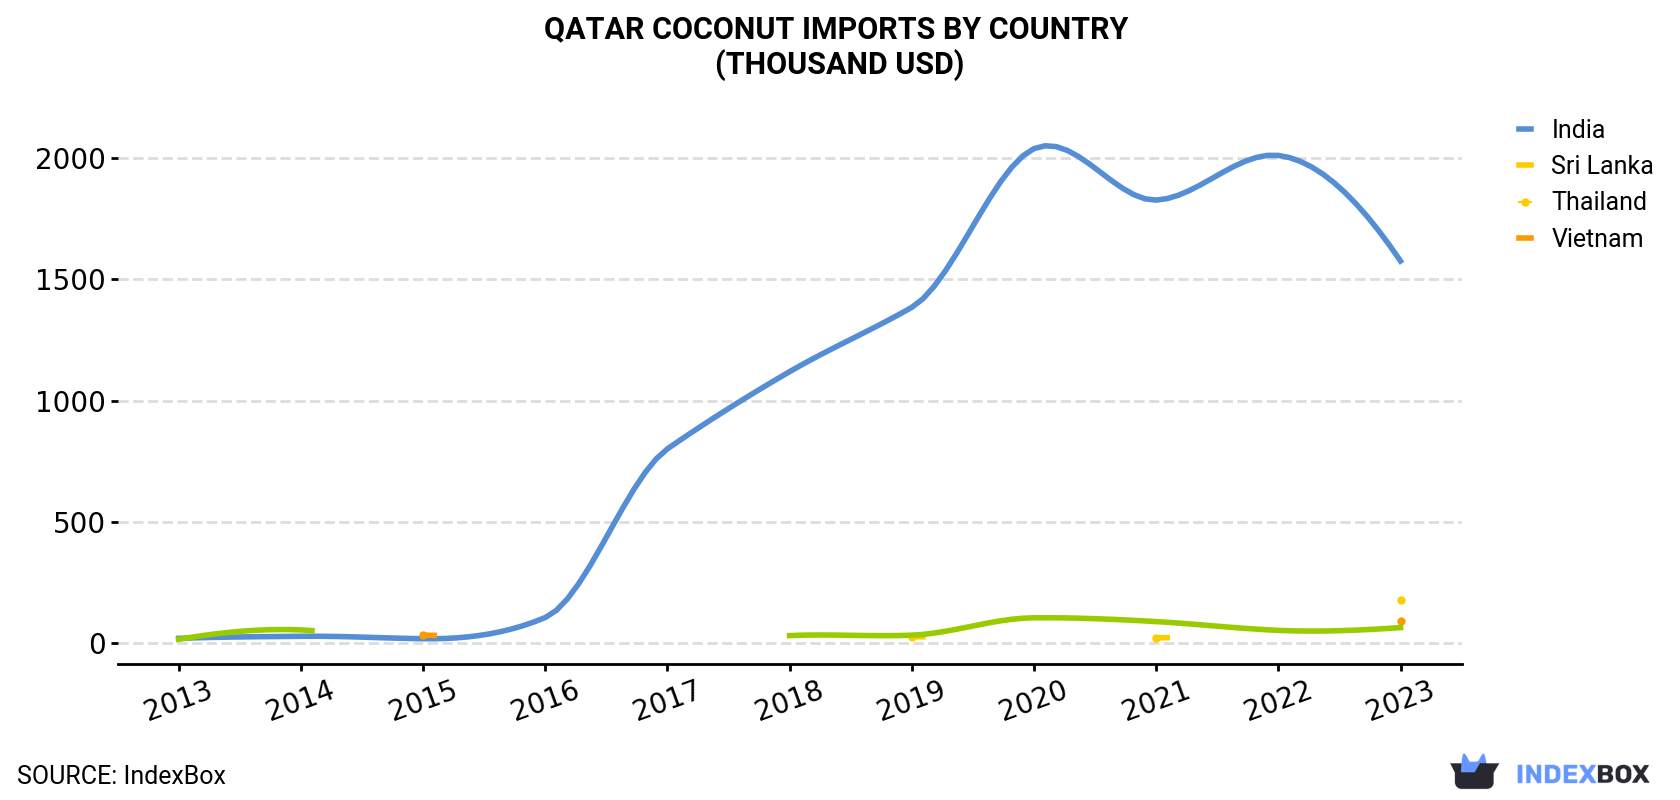 Qatar Coconut Imports By Country (Thousand USD)